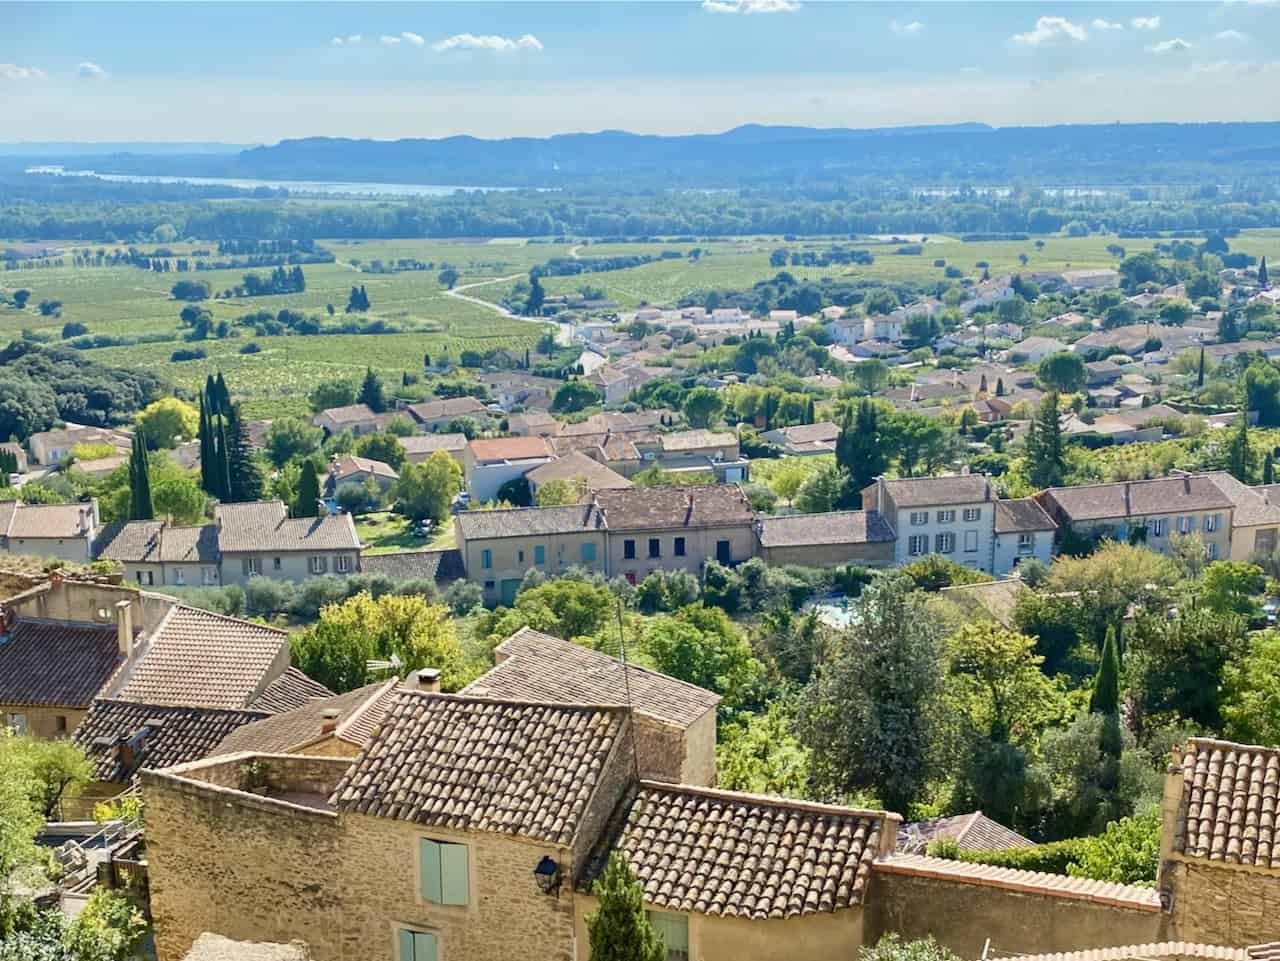 Things to do in Châteauneuf-du-Pape